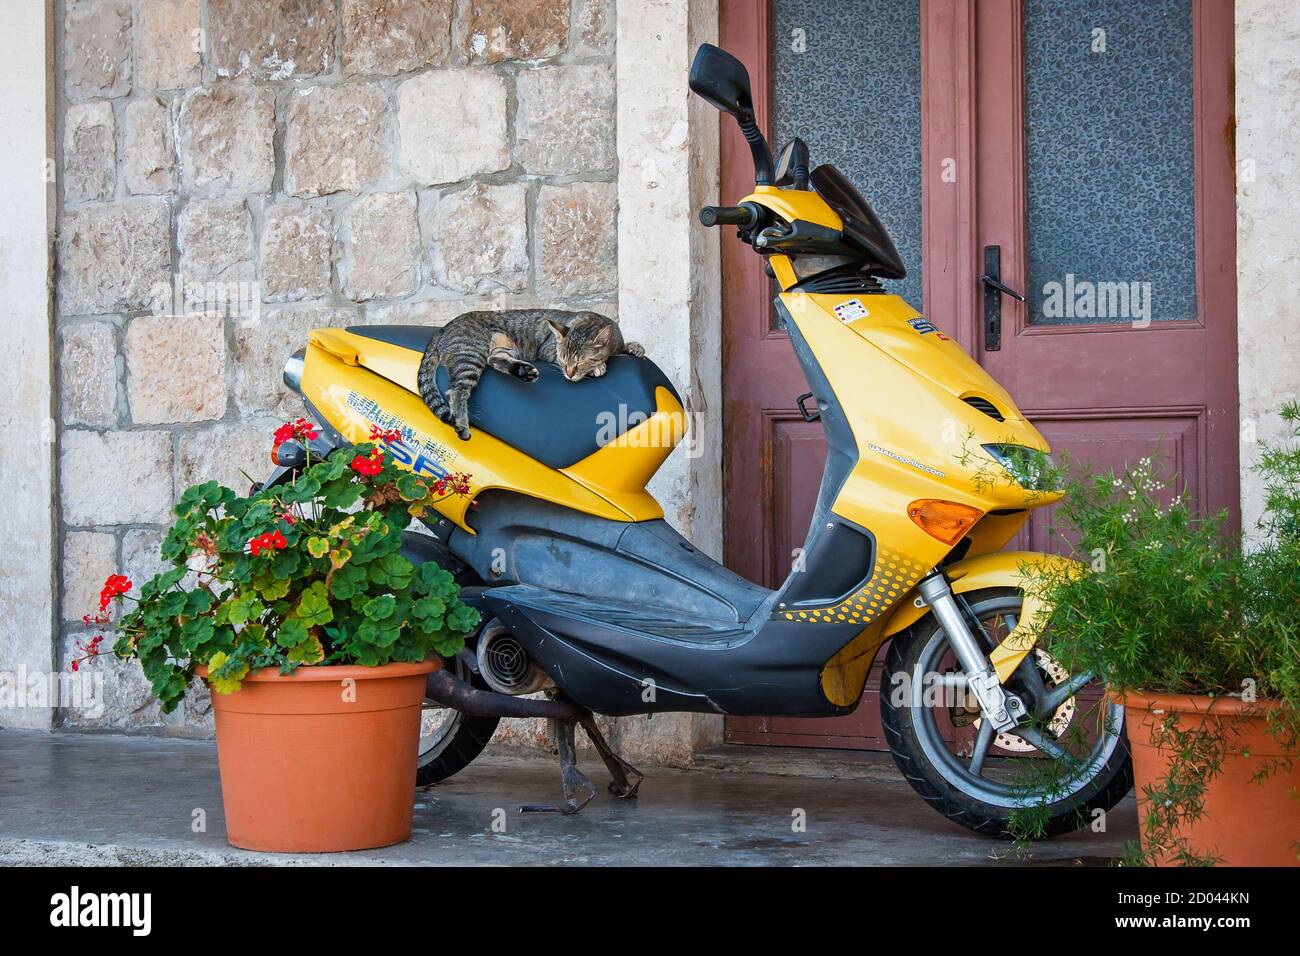 TRPANJ, CROATIA - August 27, 2013. A cat is sleeping on a scooter seat. Stock Photo